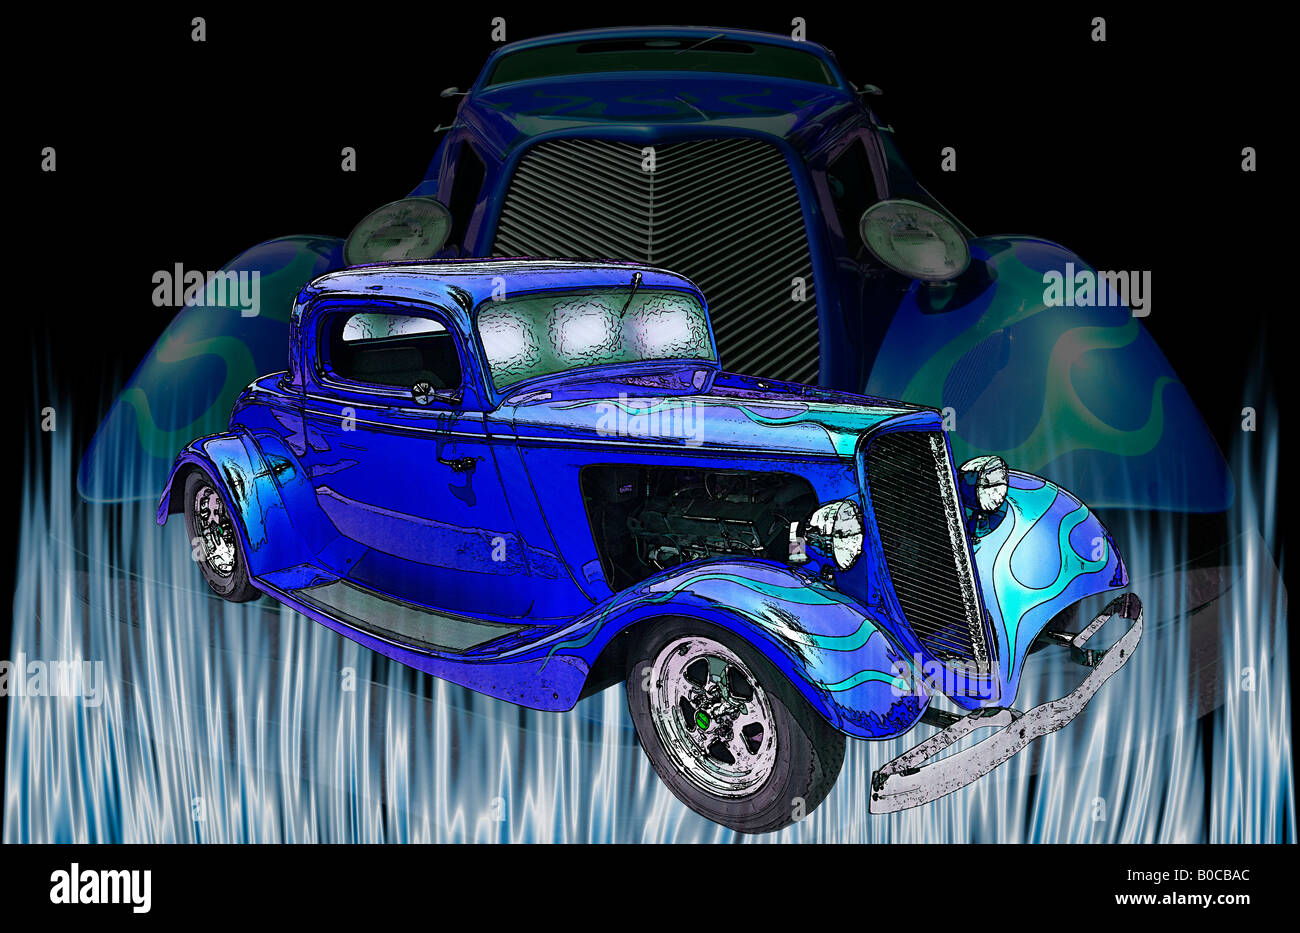 Illustration of a blue 1934 5 window Ford Coupe with a monster ghost image behind it and blue flames coming from below Stock Photo